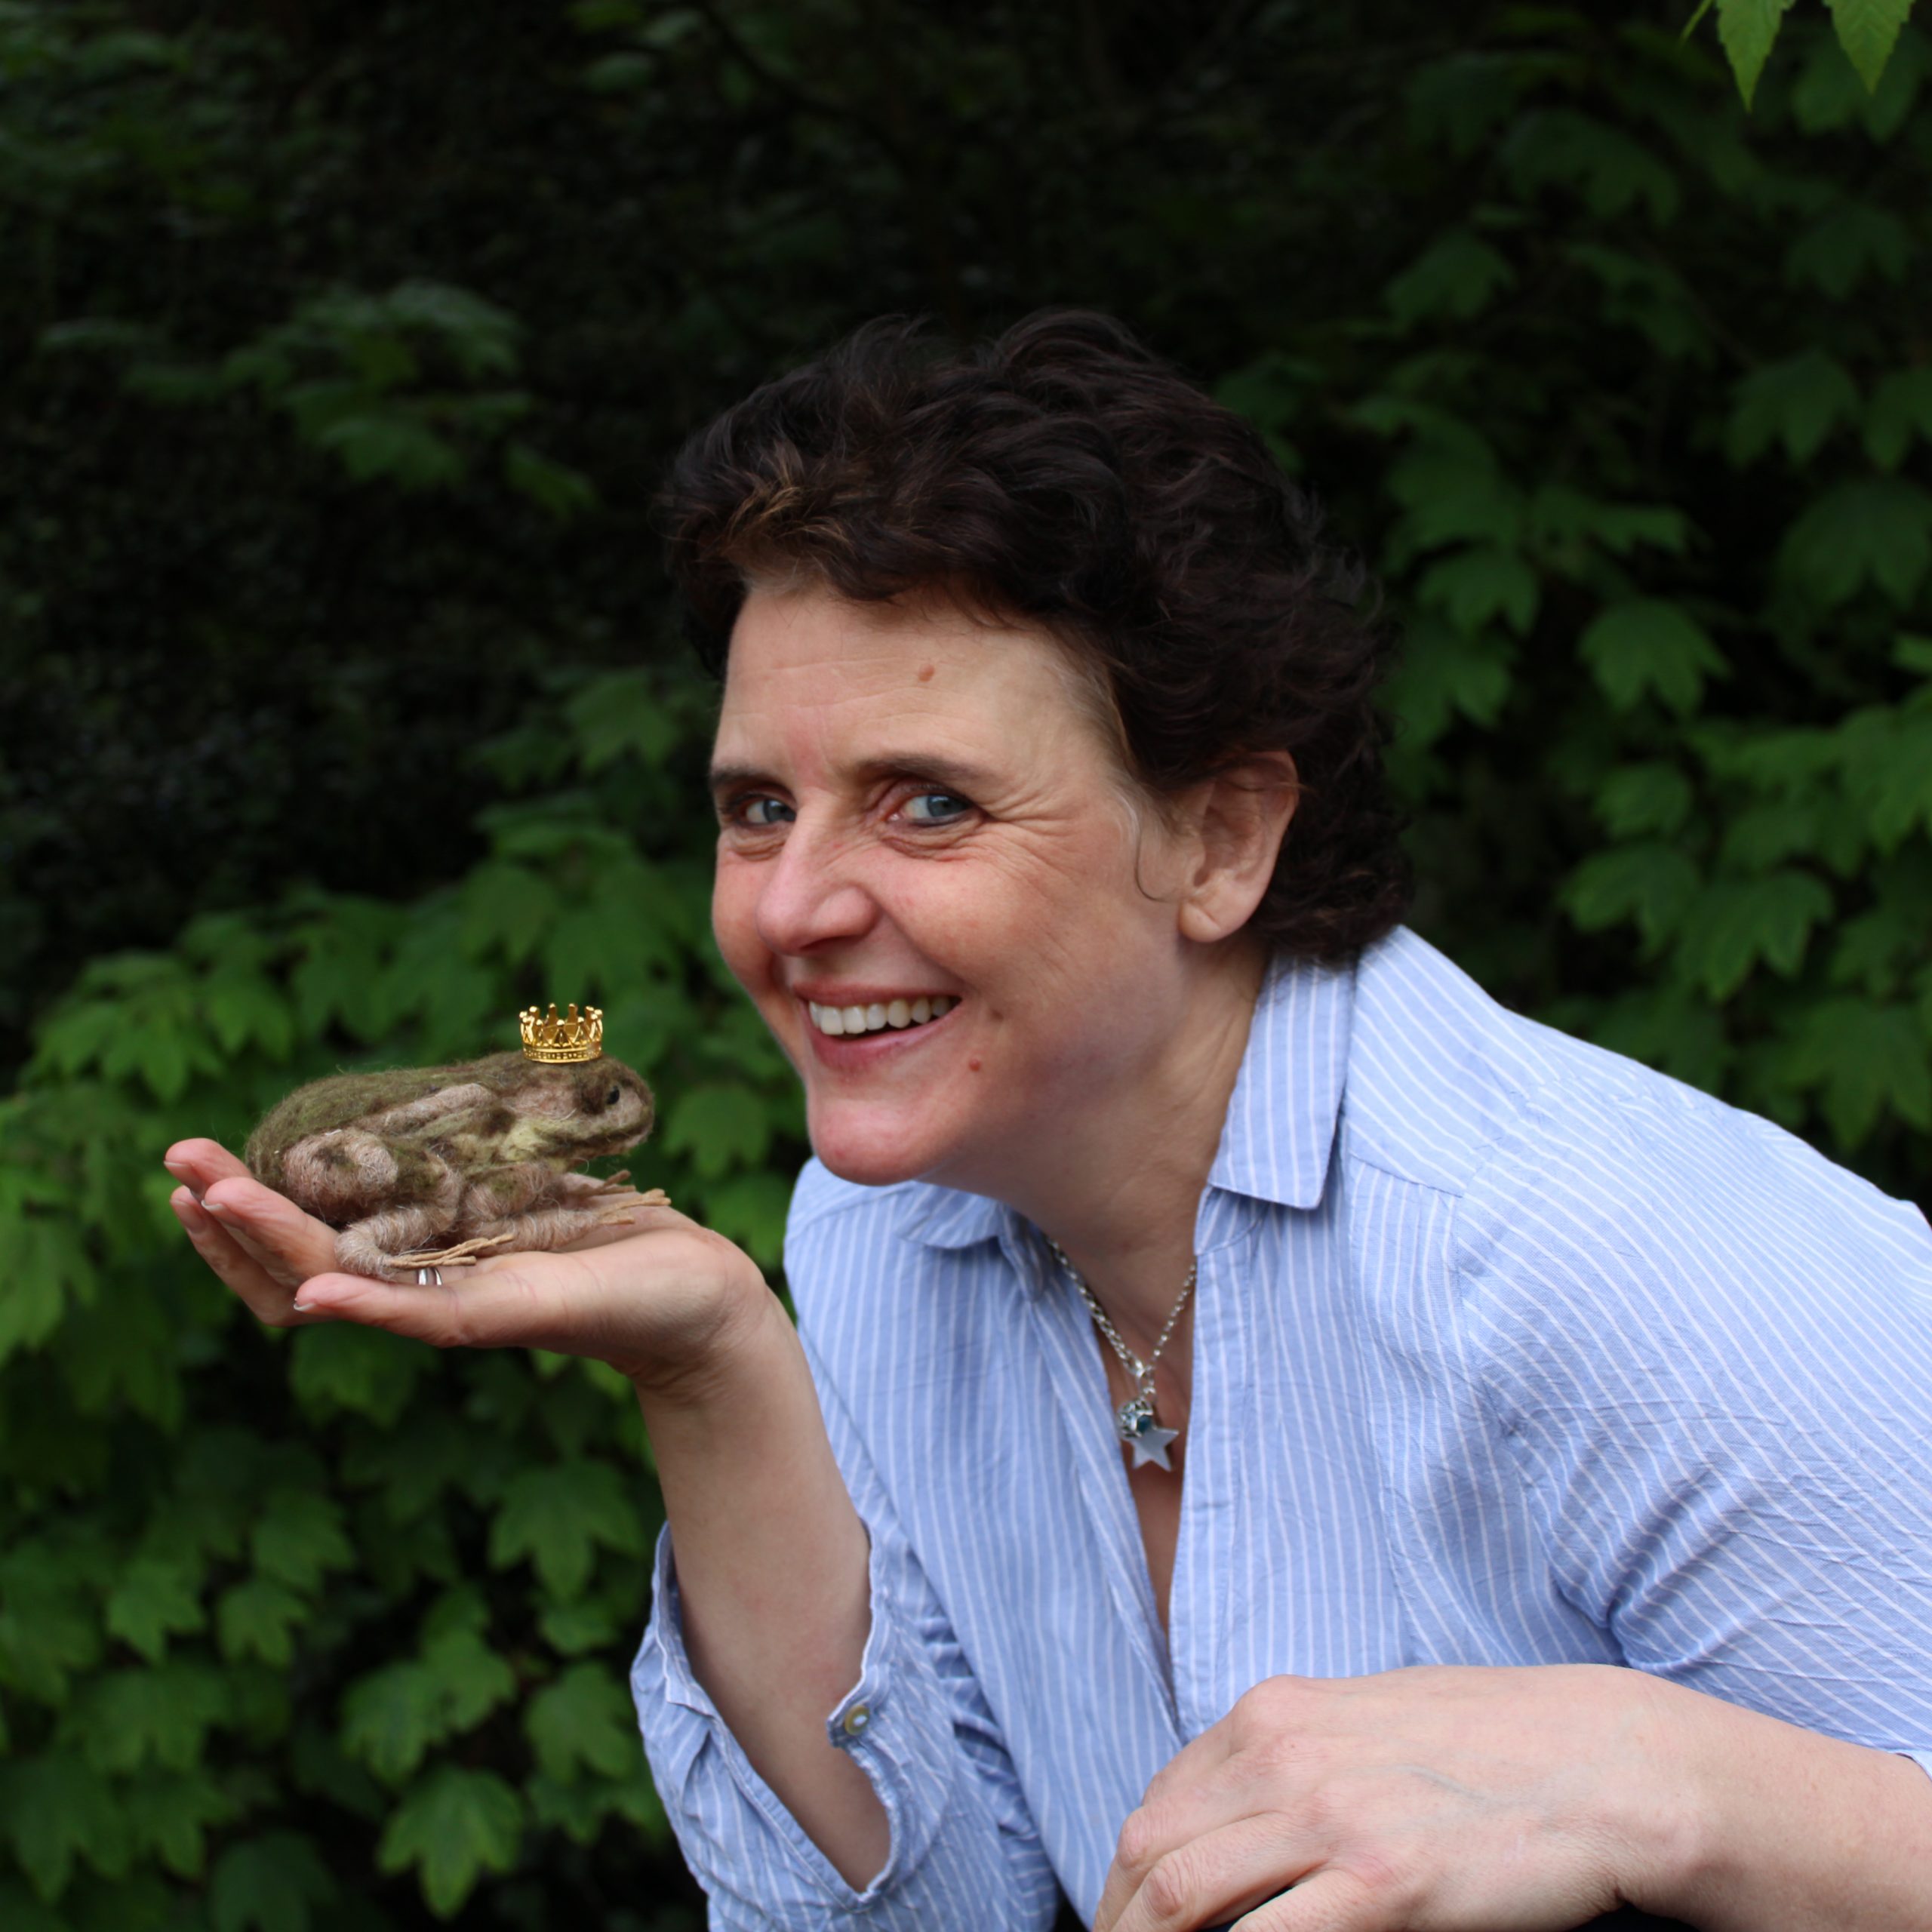 Steffi photo with frog